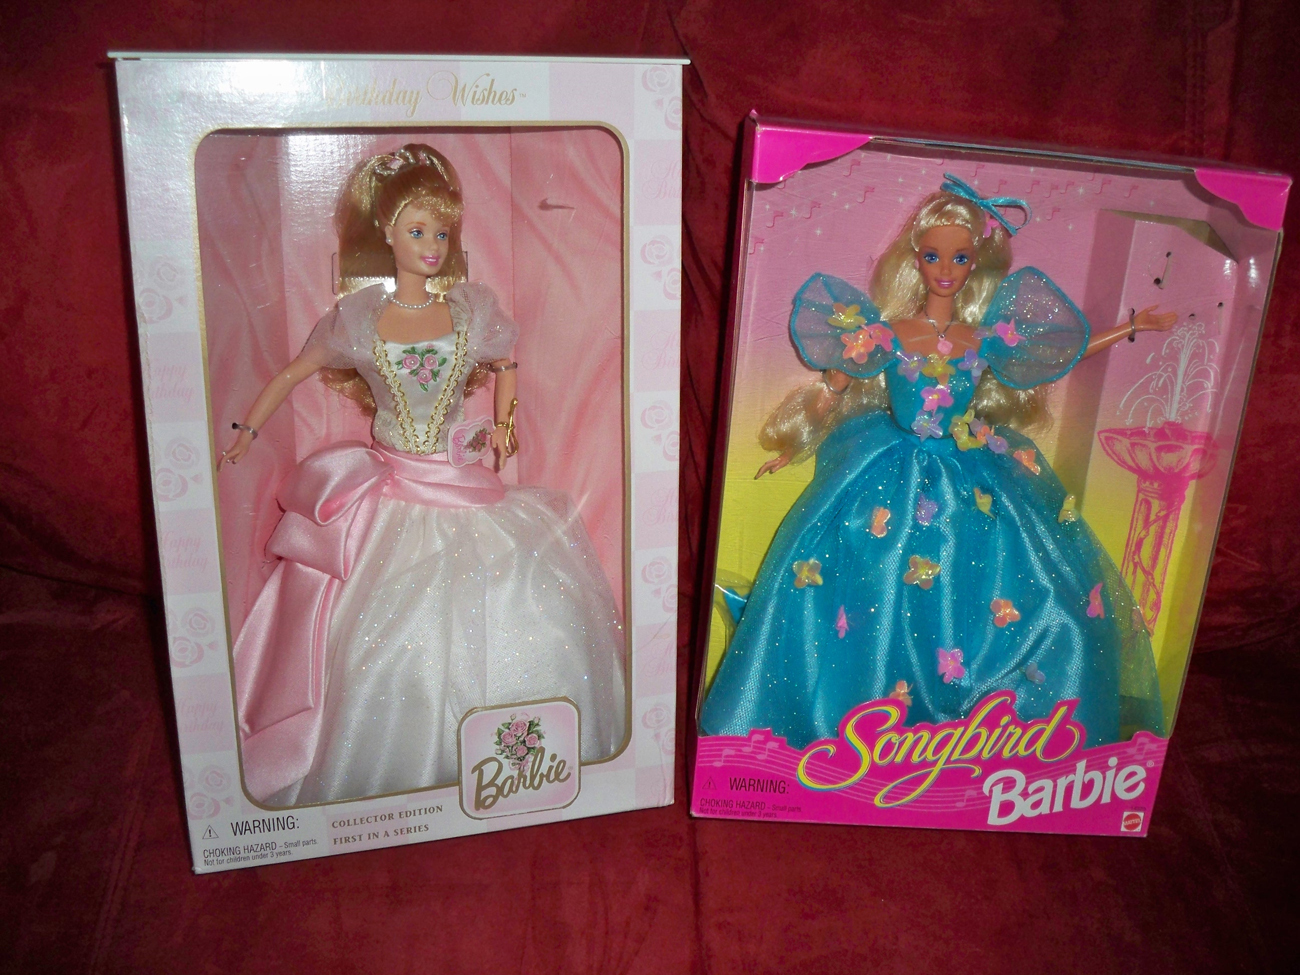 birthday wishes barbie collector edition first in a series